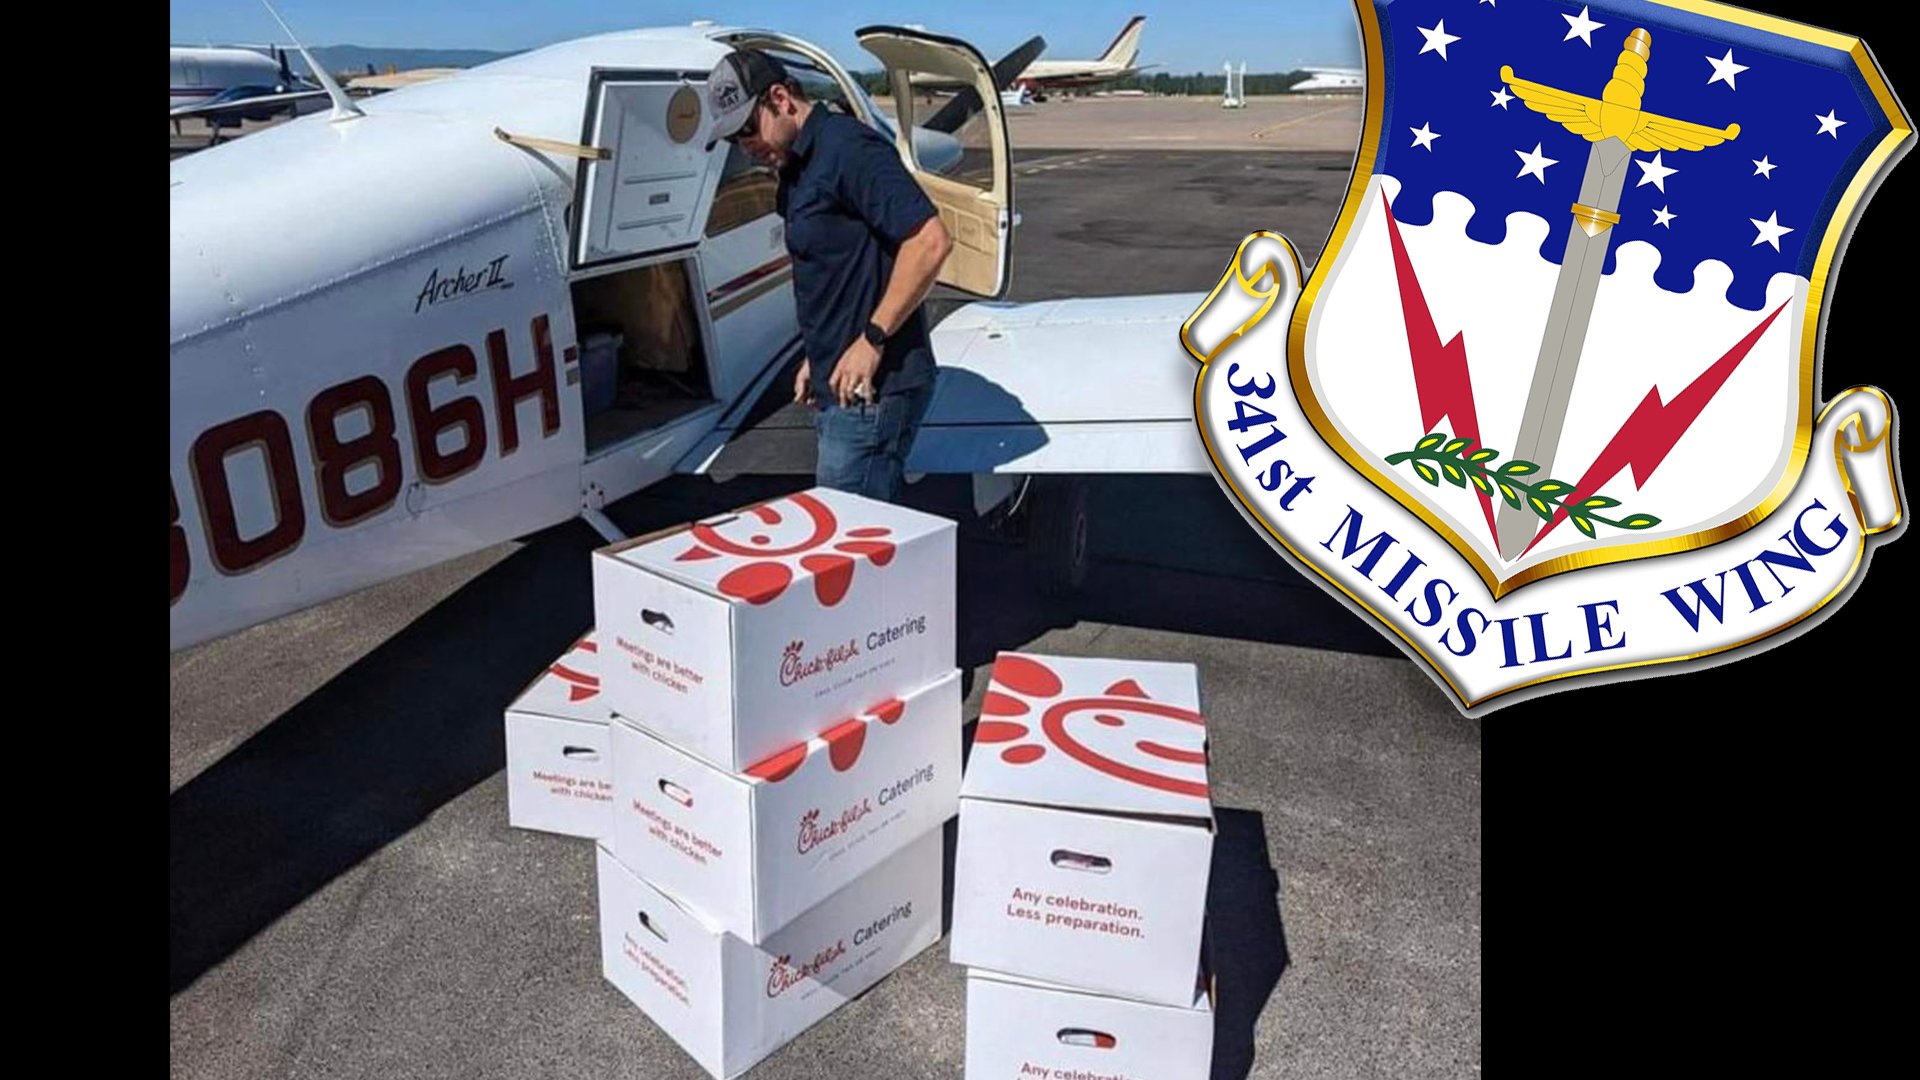 Leaders in the 341st Missile Wing at Malmstrom Air Force Base chartered a small plane to fly in $1,100 worth of Chick-Fil-A sandwiches for junior enlisted personnel. Photo from Malmstrom 5/6 Alliance Facebook page.